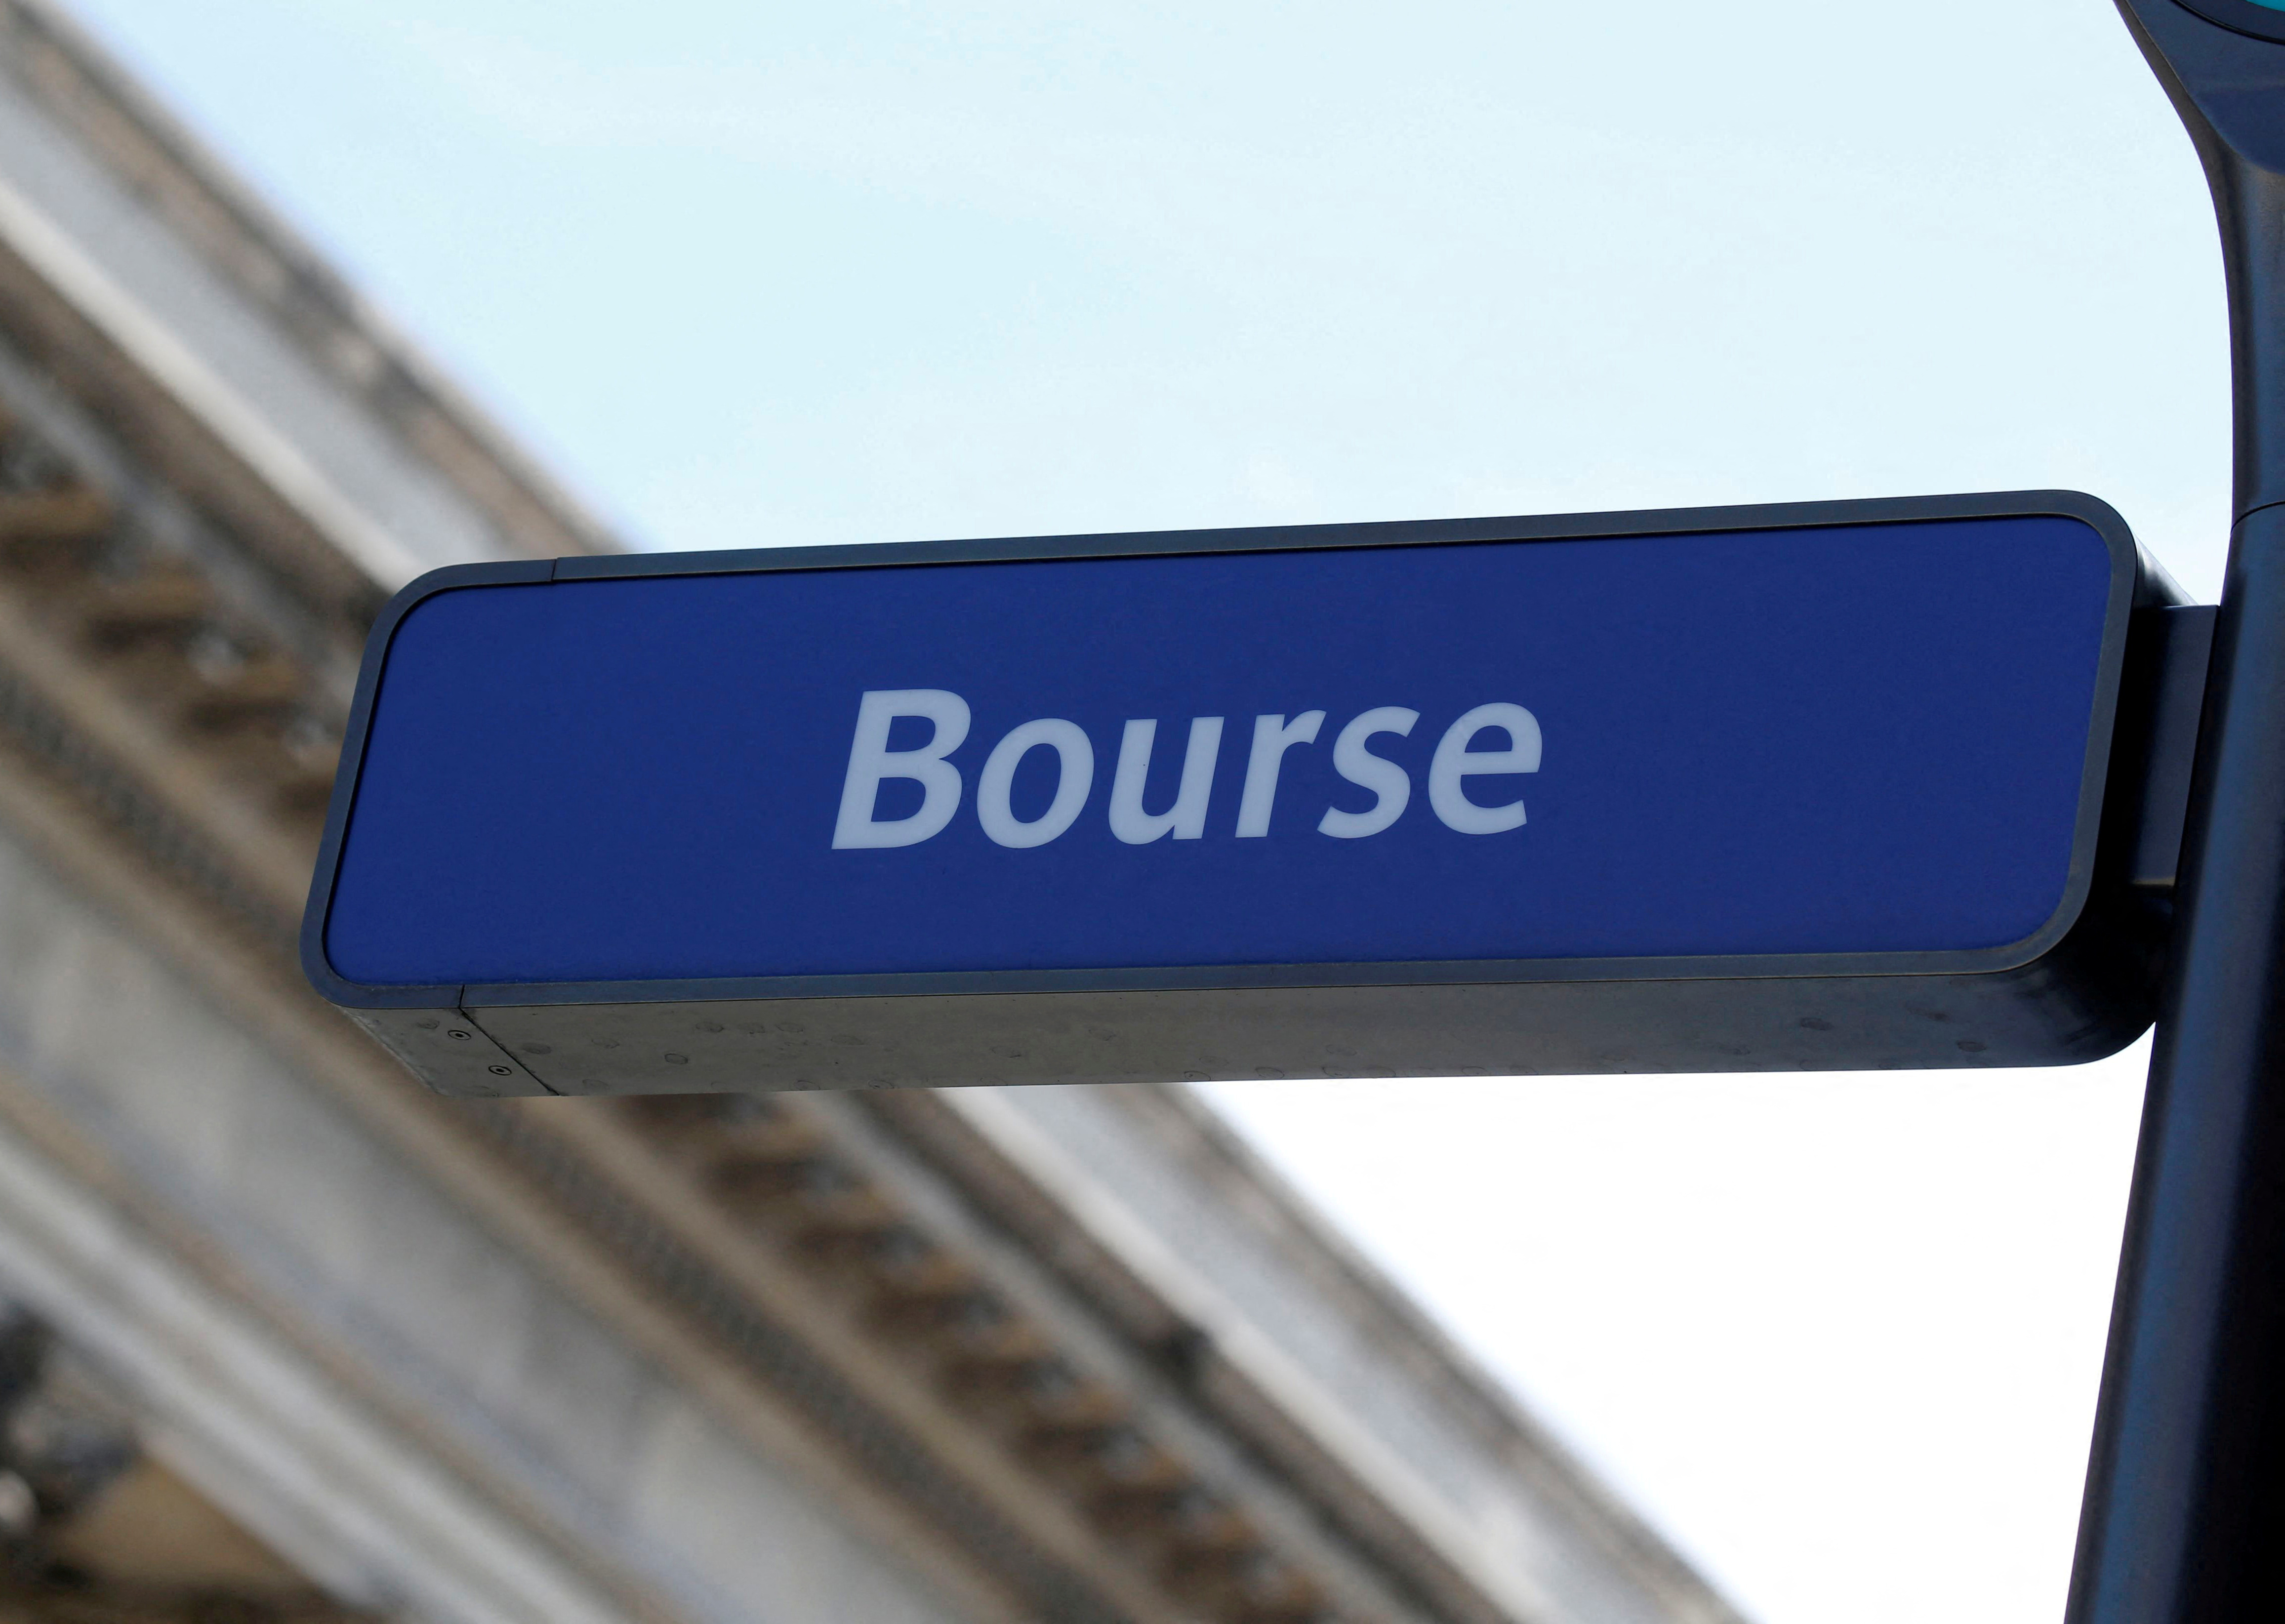 The word Bourse is seen on a sign near the Palais Brongniart, former Paris Stock Exchange, located Place de la Bourse in Paris